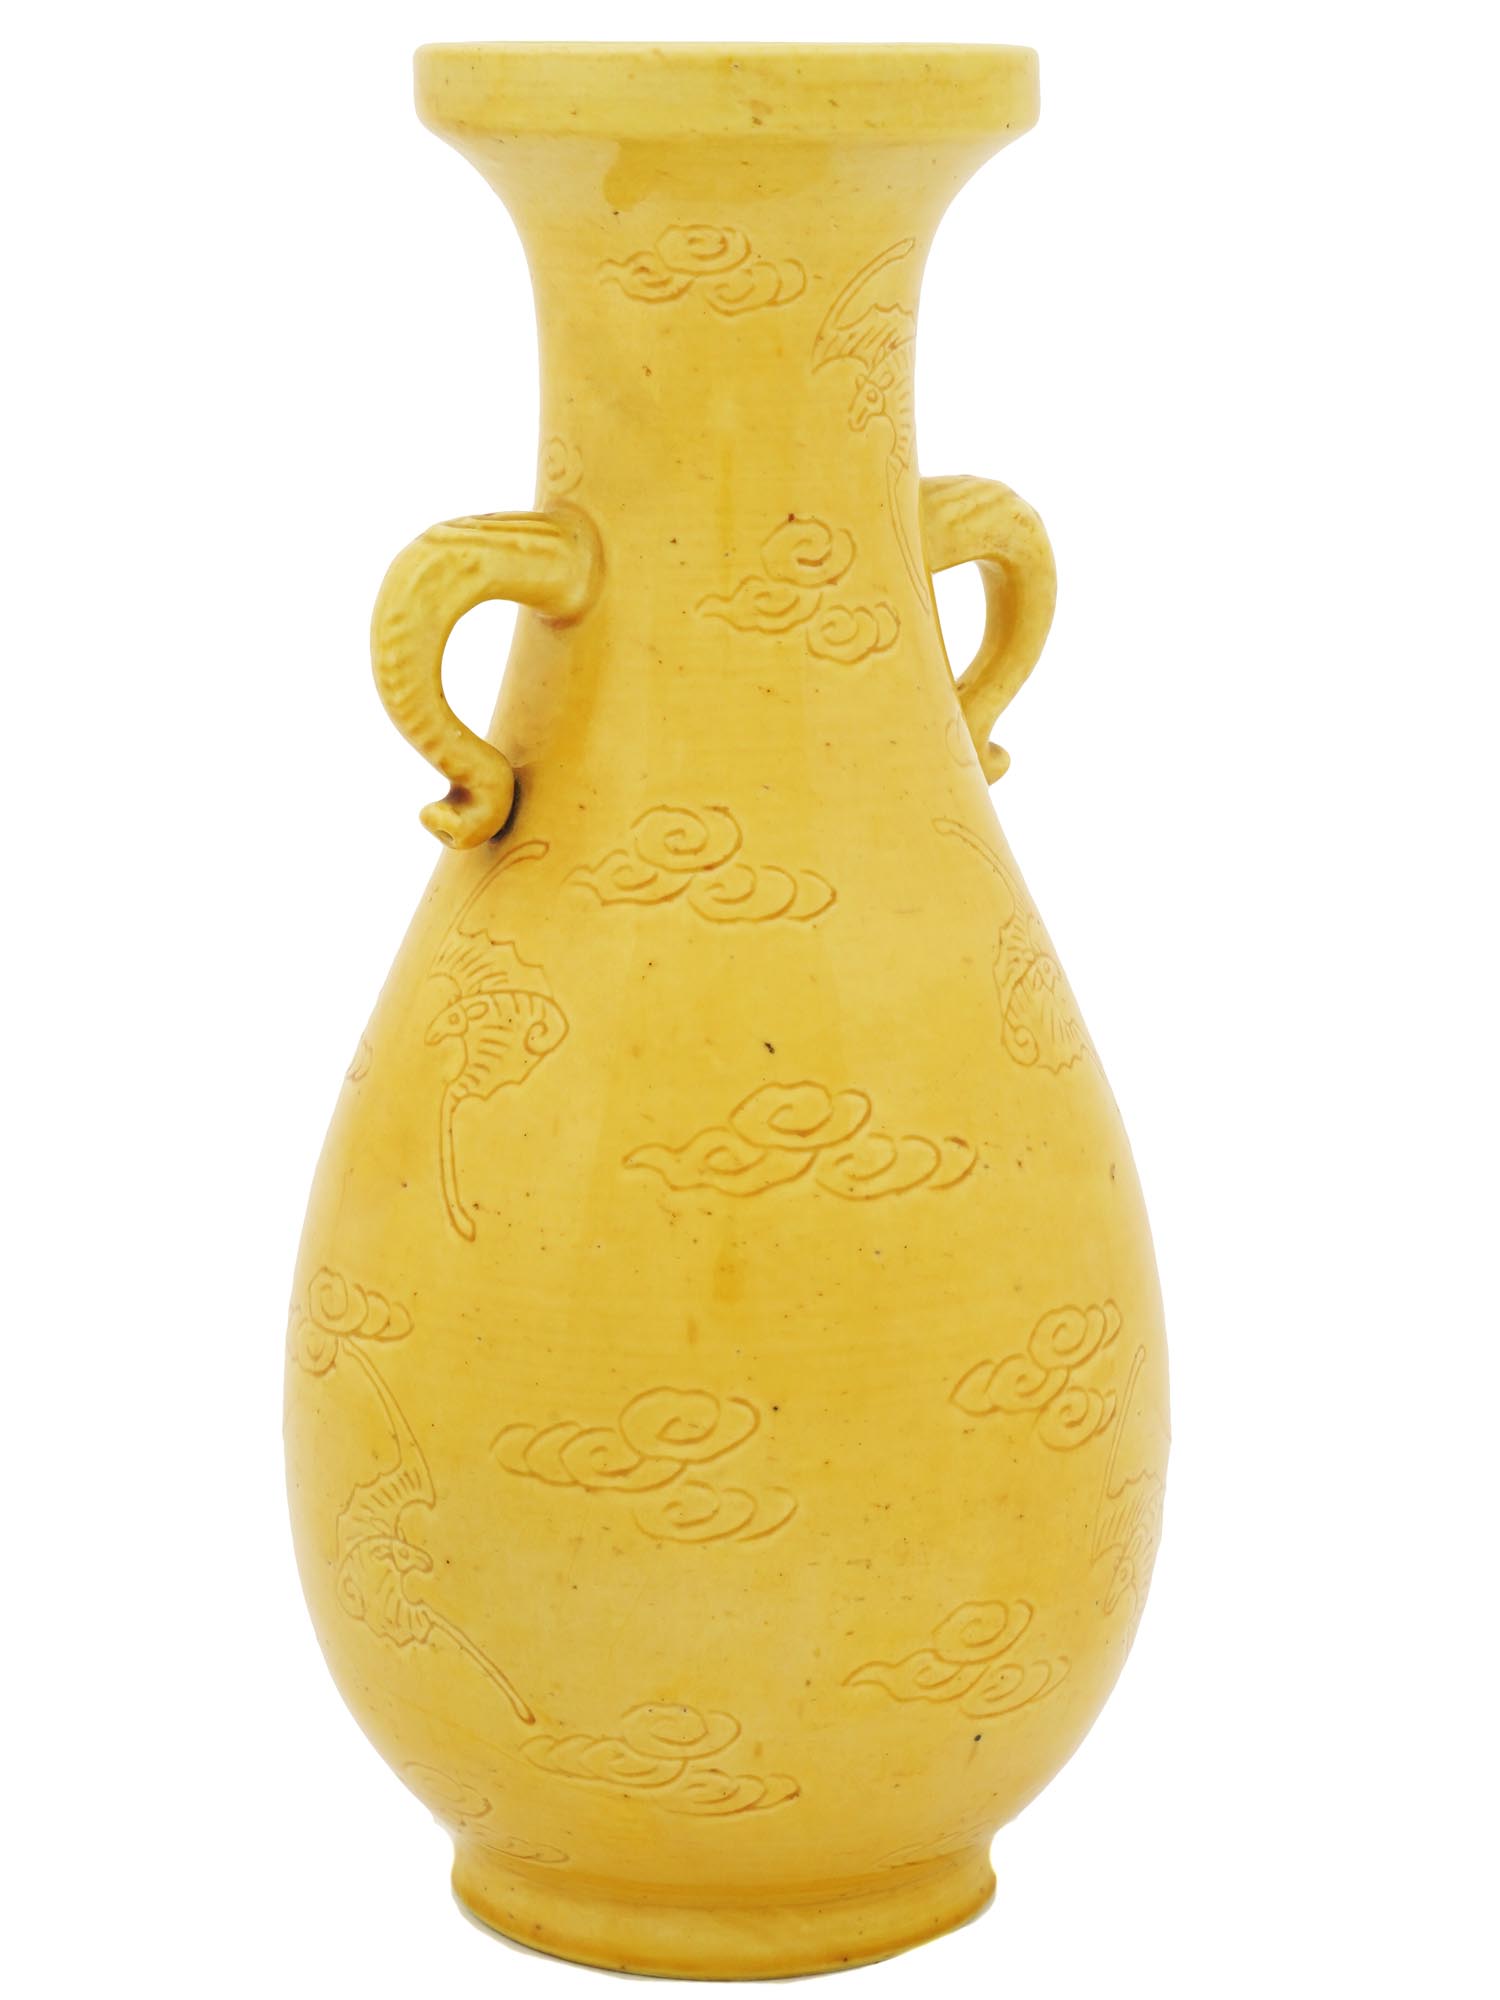 YELLOW CHINESE CERAMIC VASE WITH INCISED DESIGN PIC-0